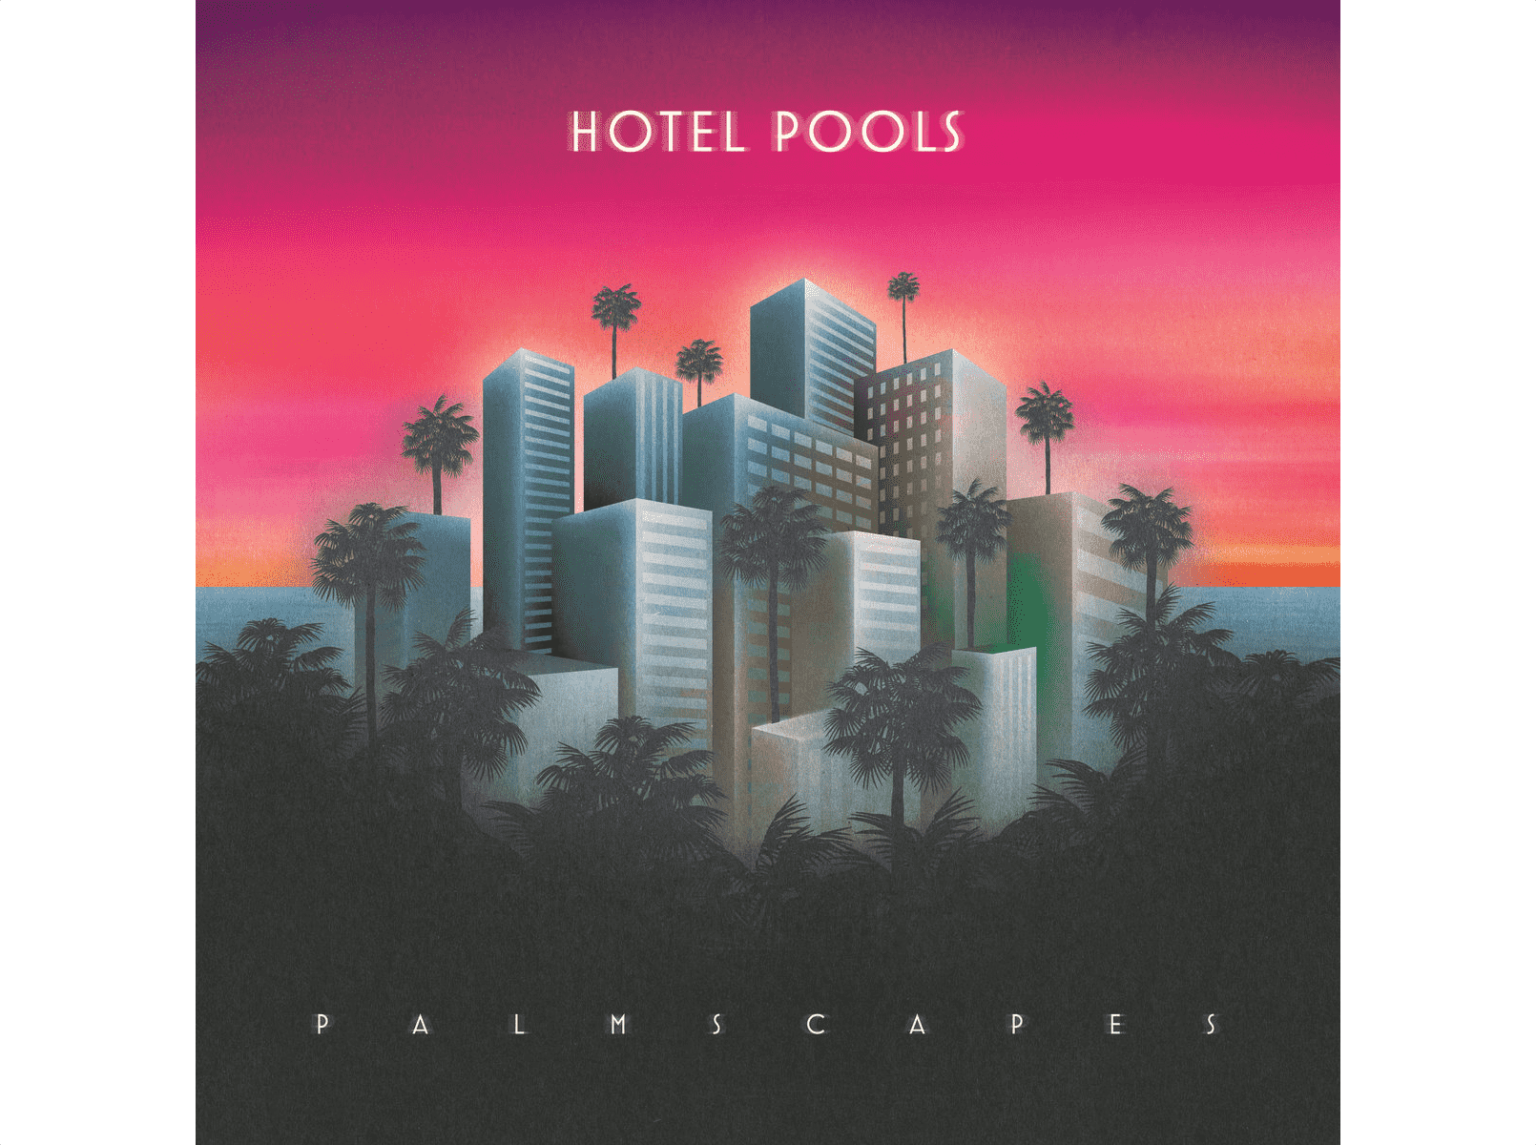 Hotel Pools: Palmscapes